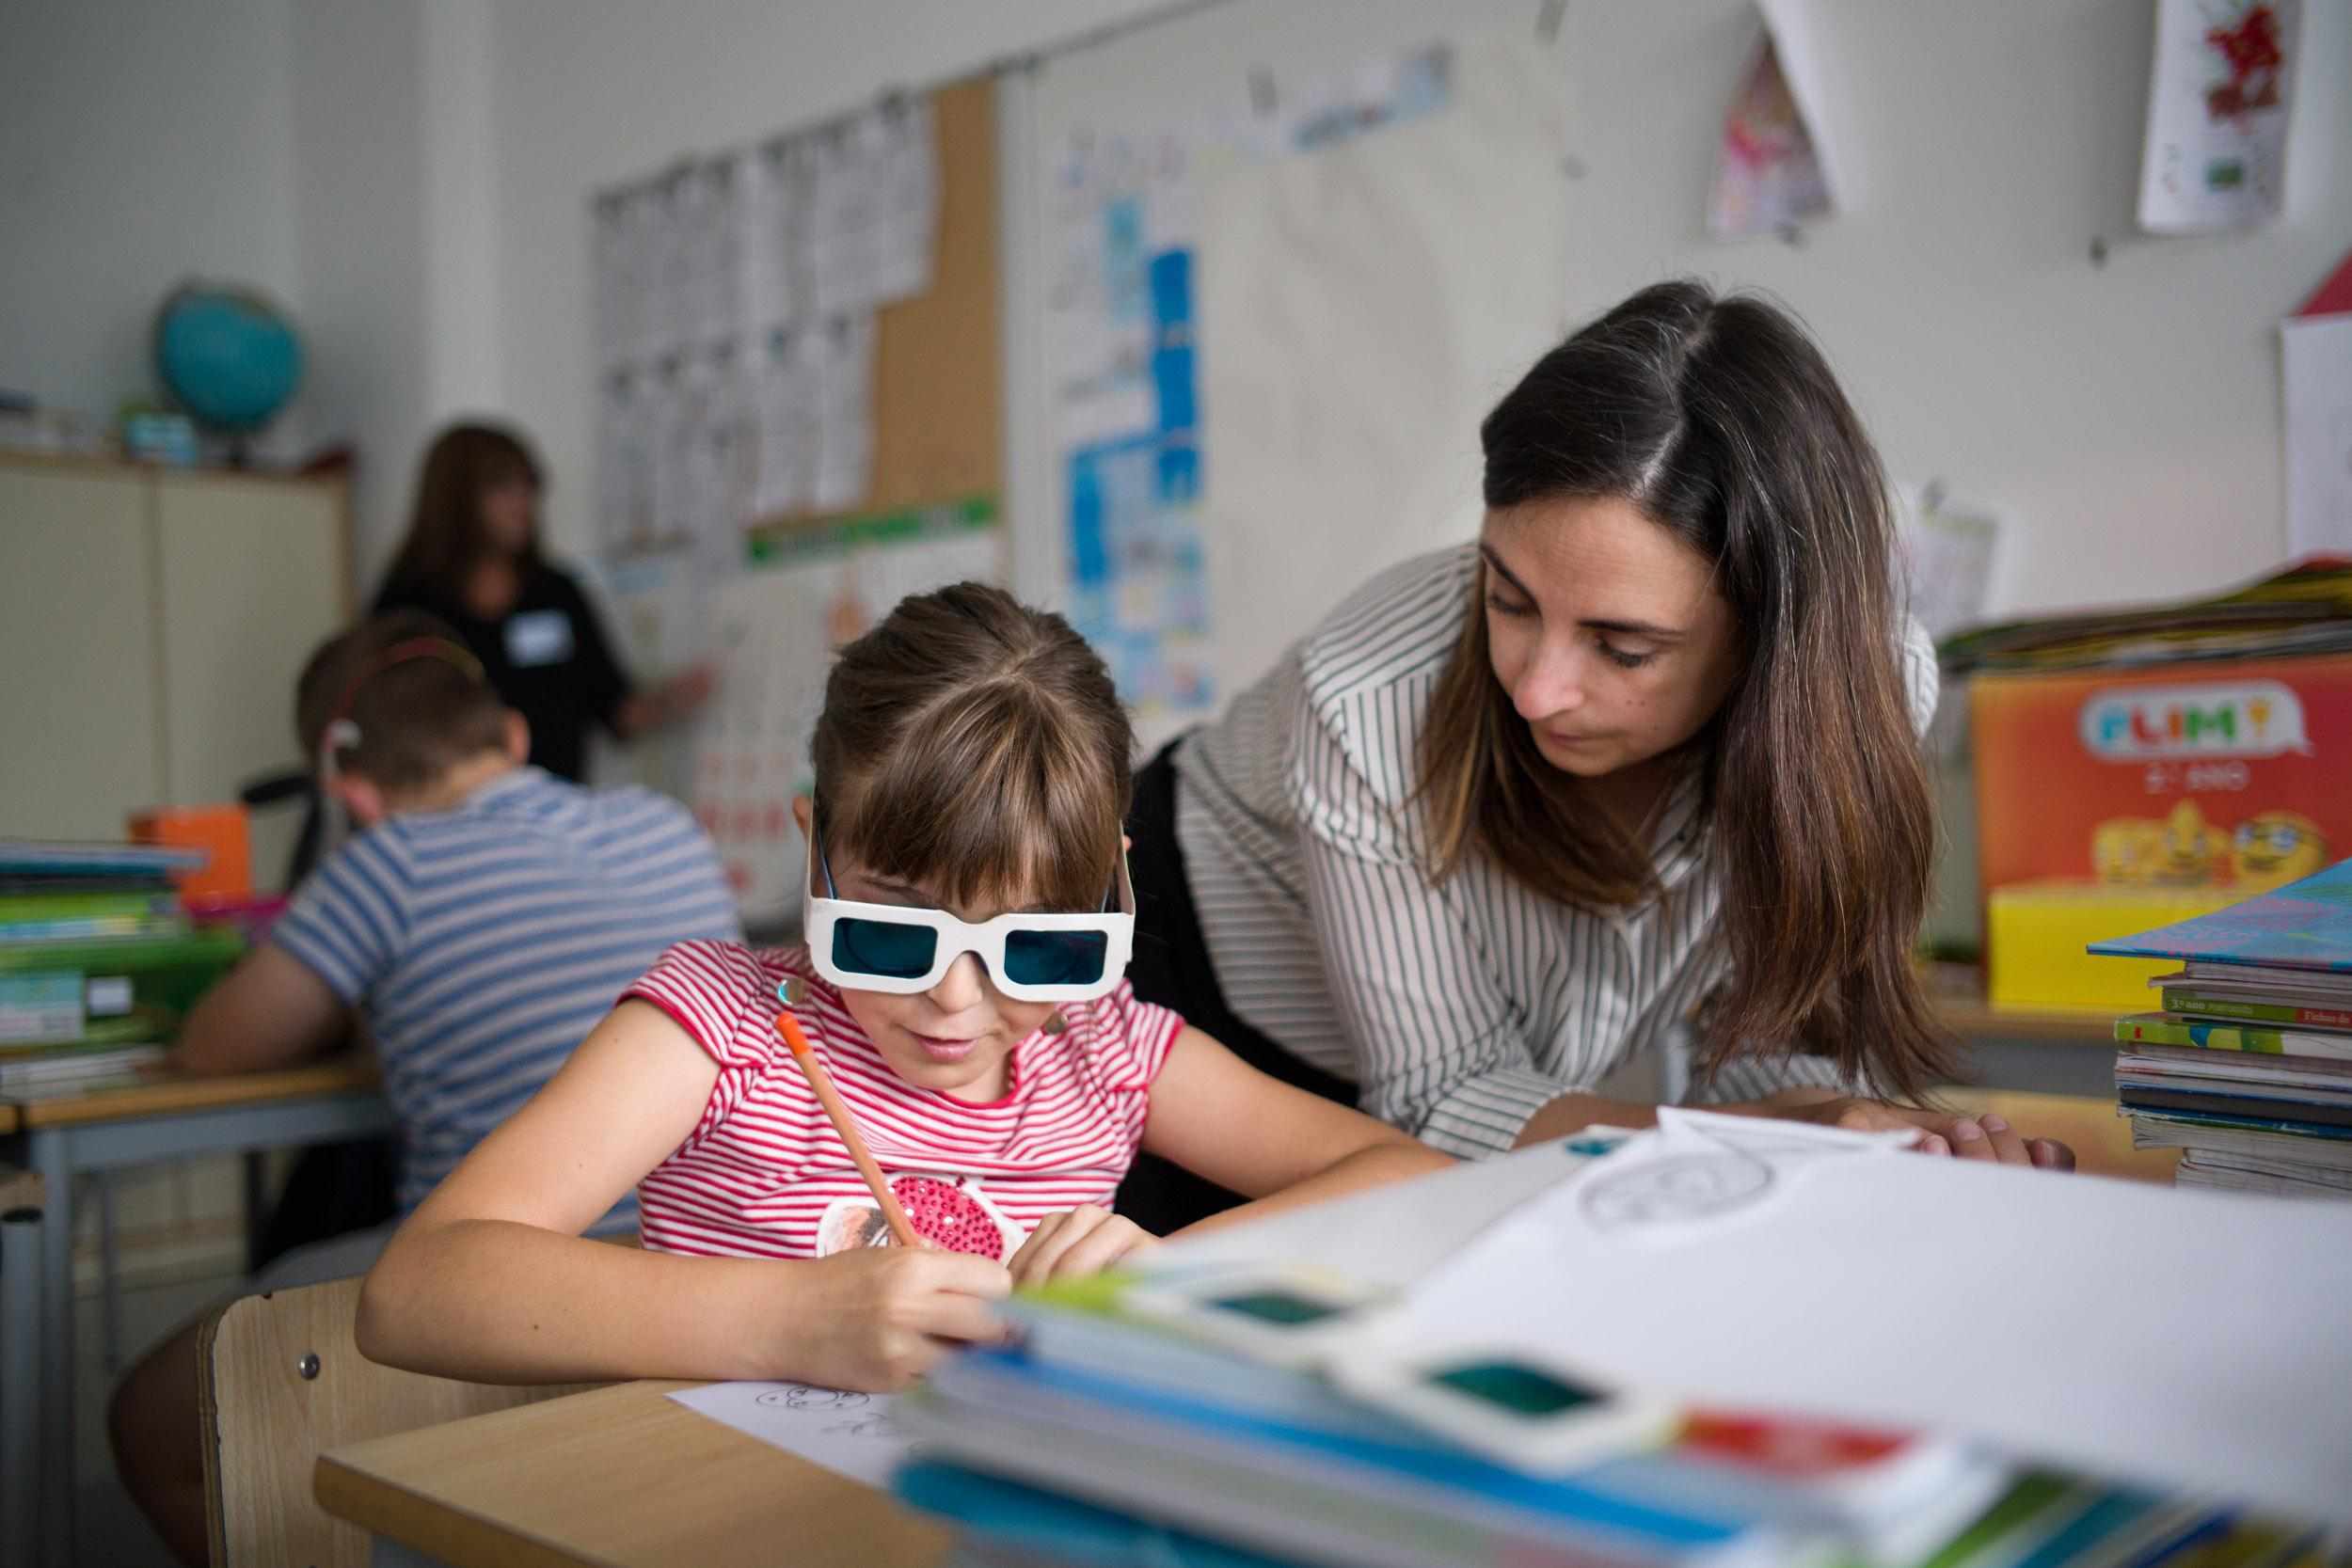 Adult with long dark brown hair next to a child with ColorADD glasses on (helps colorblind kids see color clearly). They are working on the child's writing